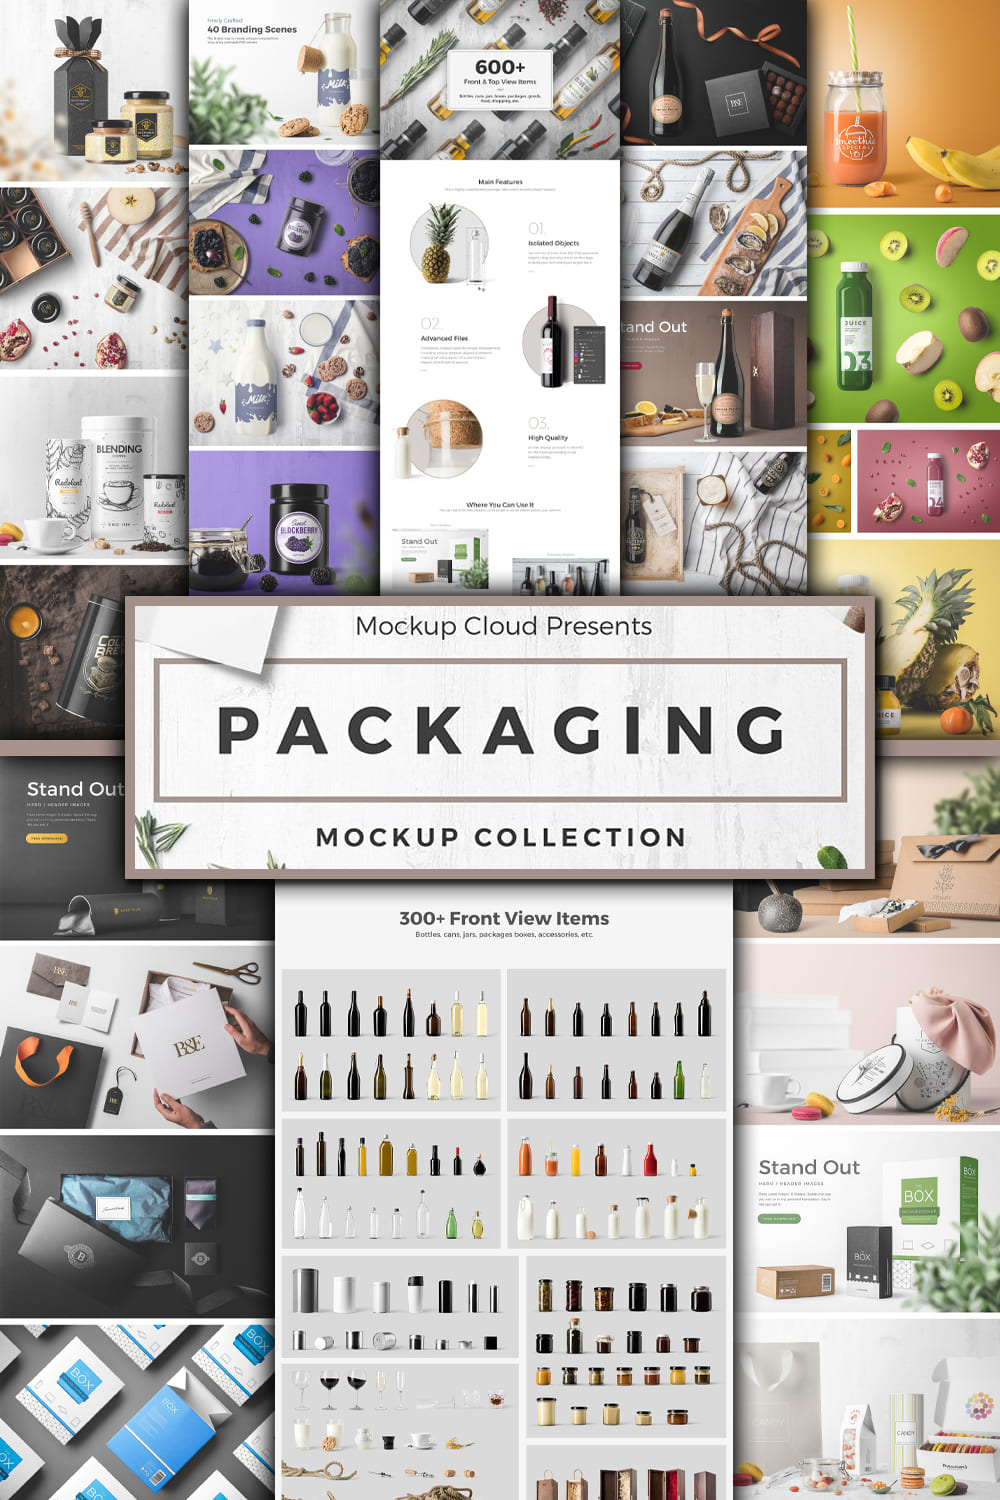 Packaging mockup collection of pinterest.